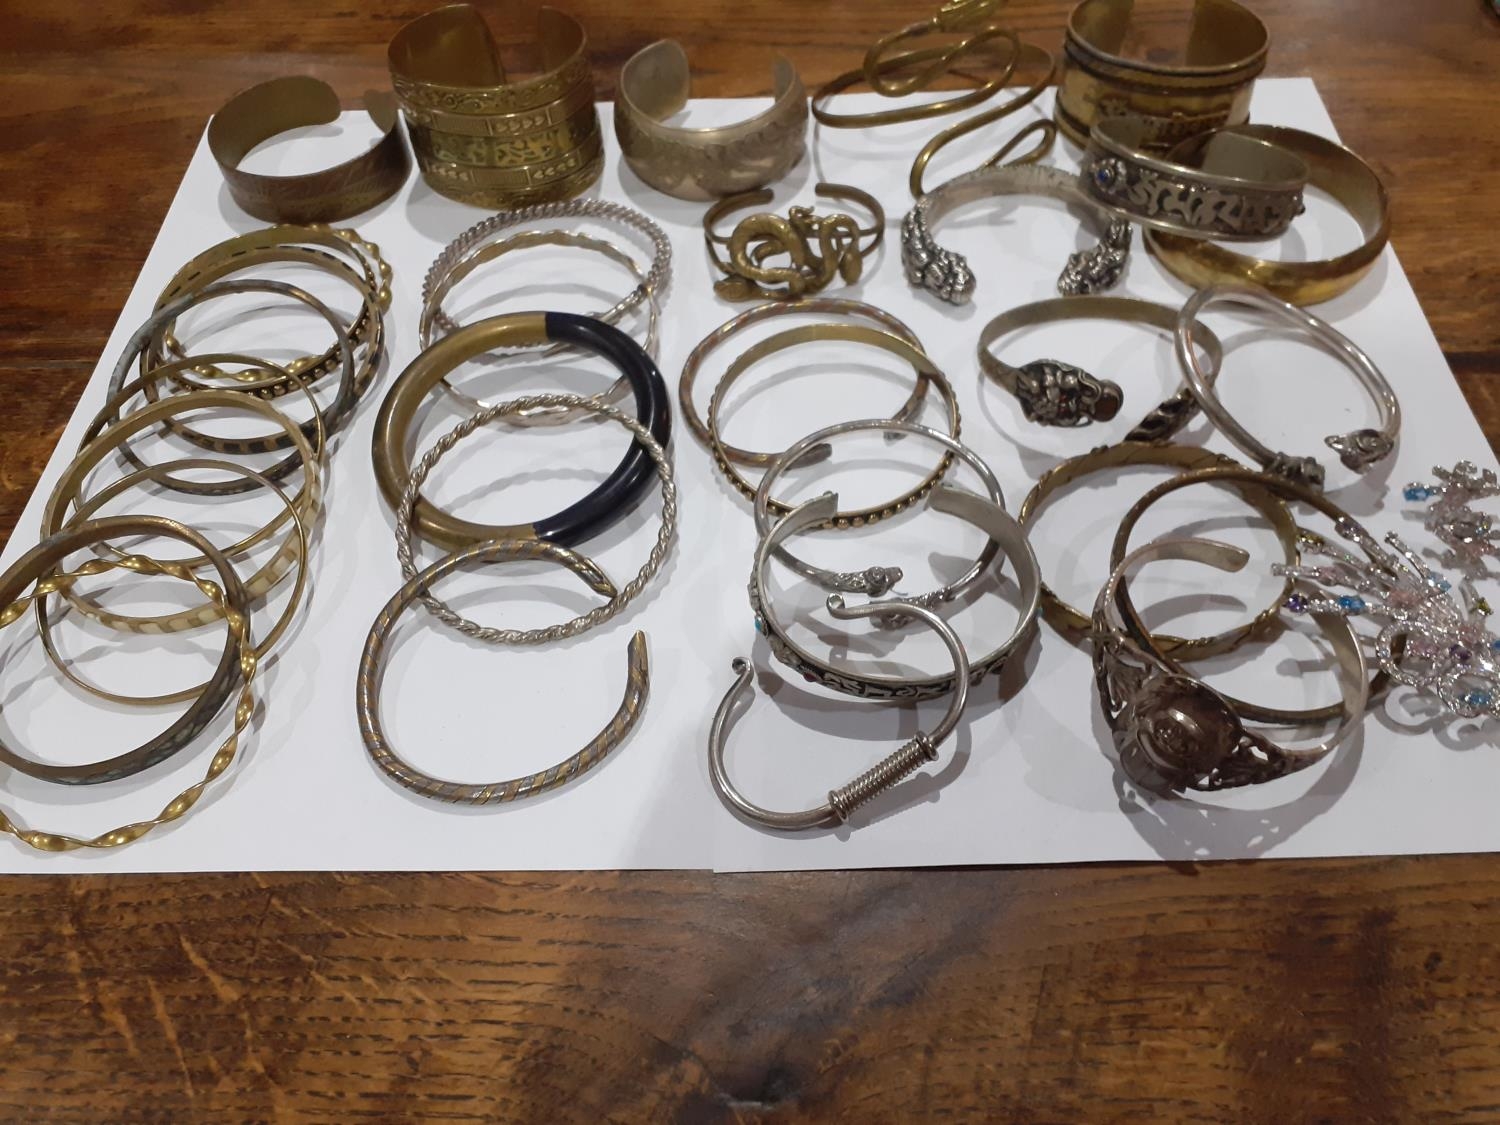 Eastern white metal and silver and other metallic bangles to include ornate bangles with snake, - Image 2 of 12